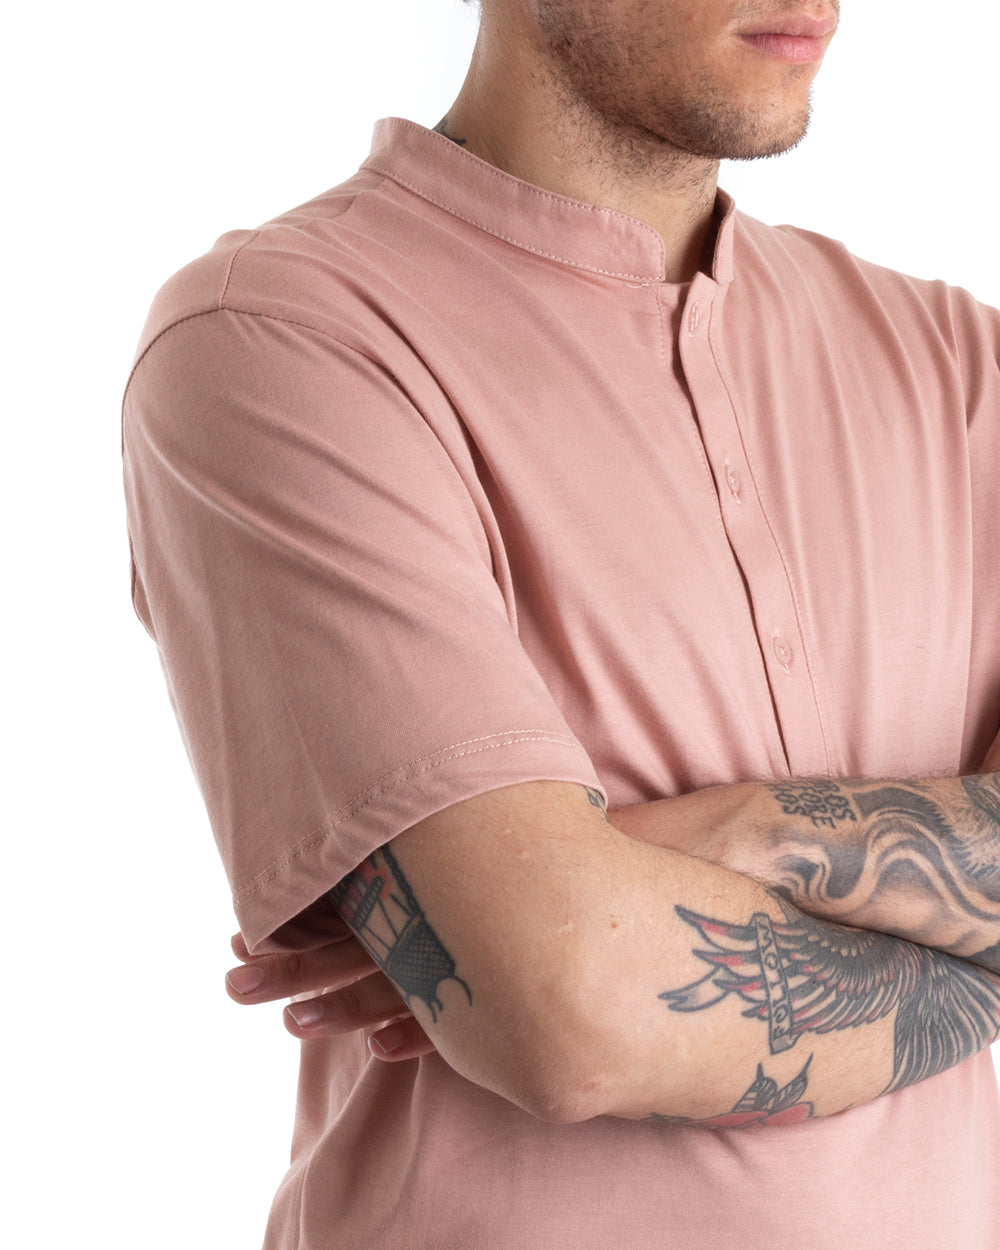 Men's T-shirt Button Neck Solid Color Pink Short Sleeve Basic Casual GIOSAL